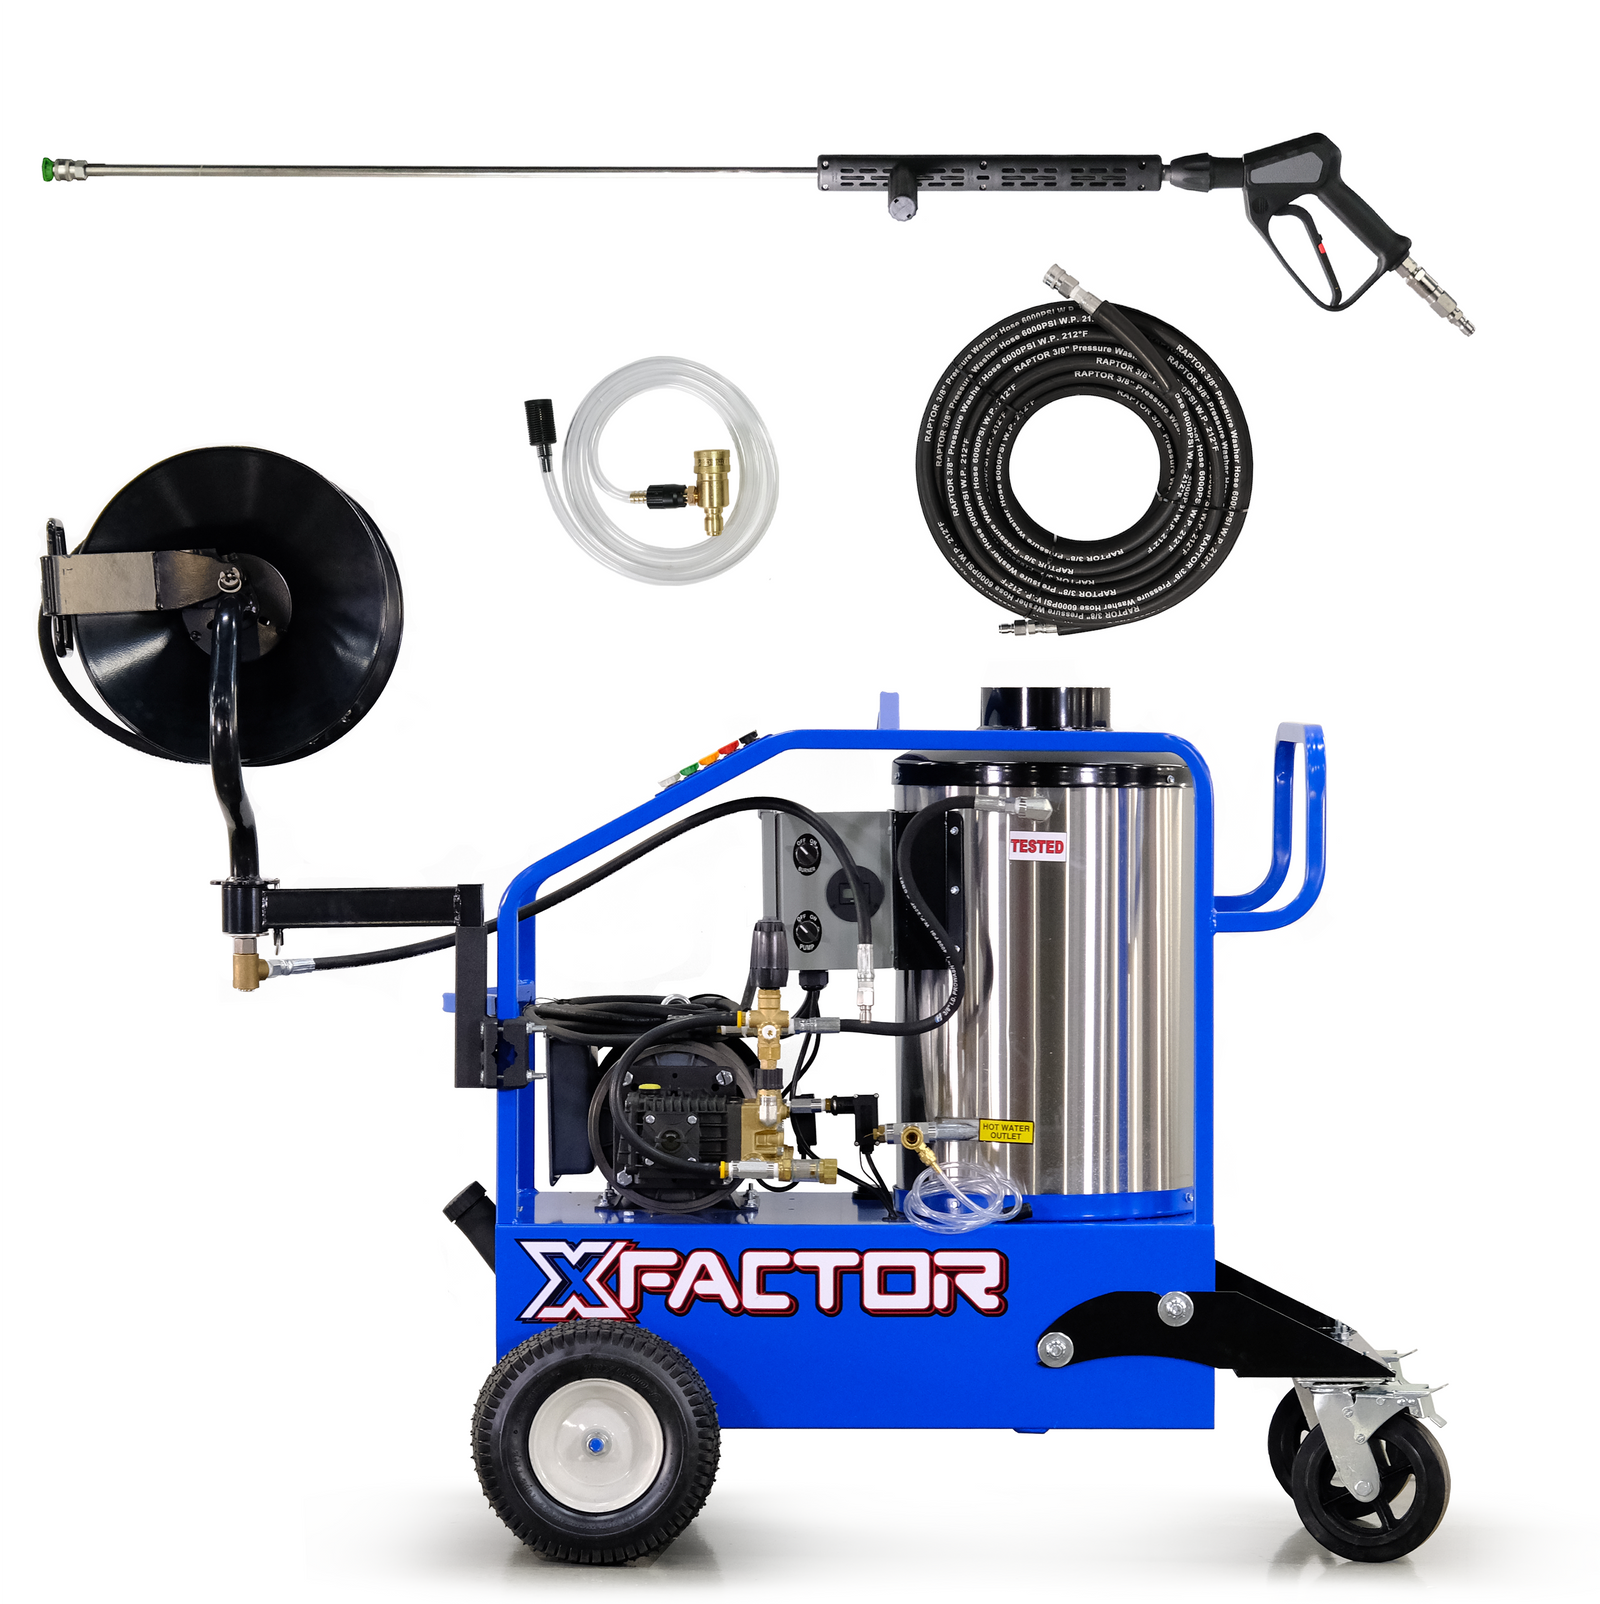 X Factor Hot Water Portable 220v Electric Power Washer - Chem-X